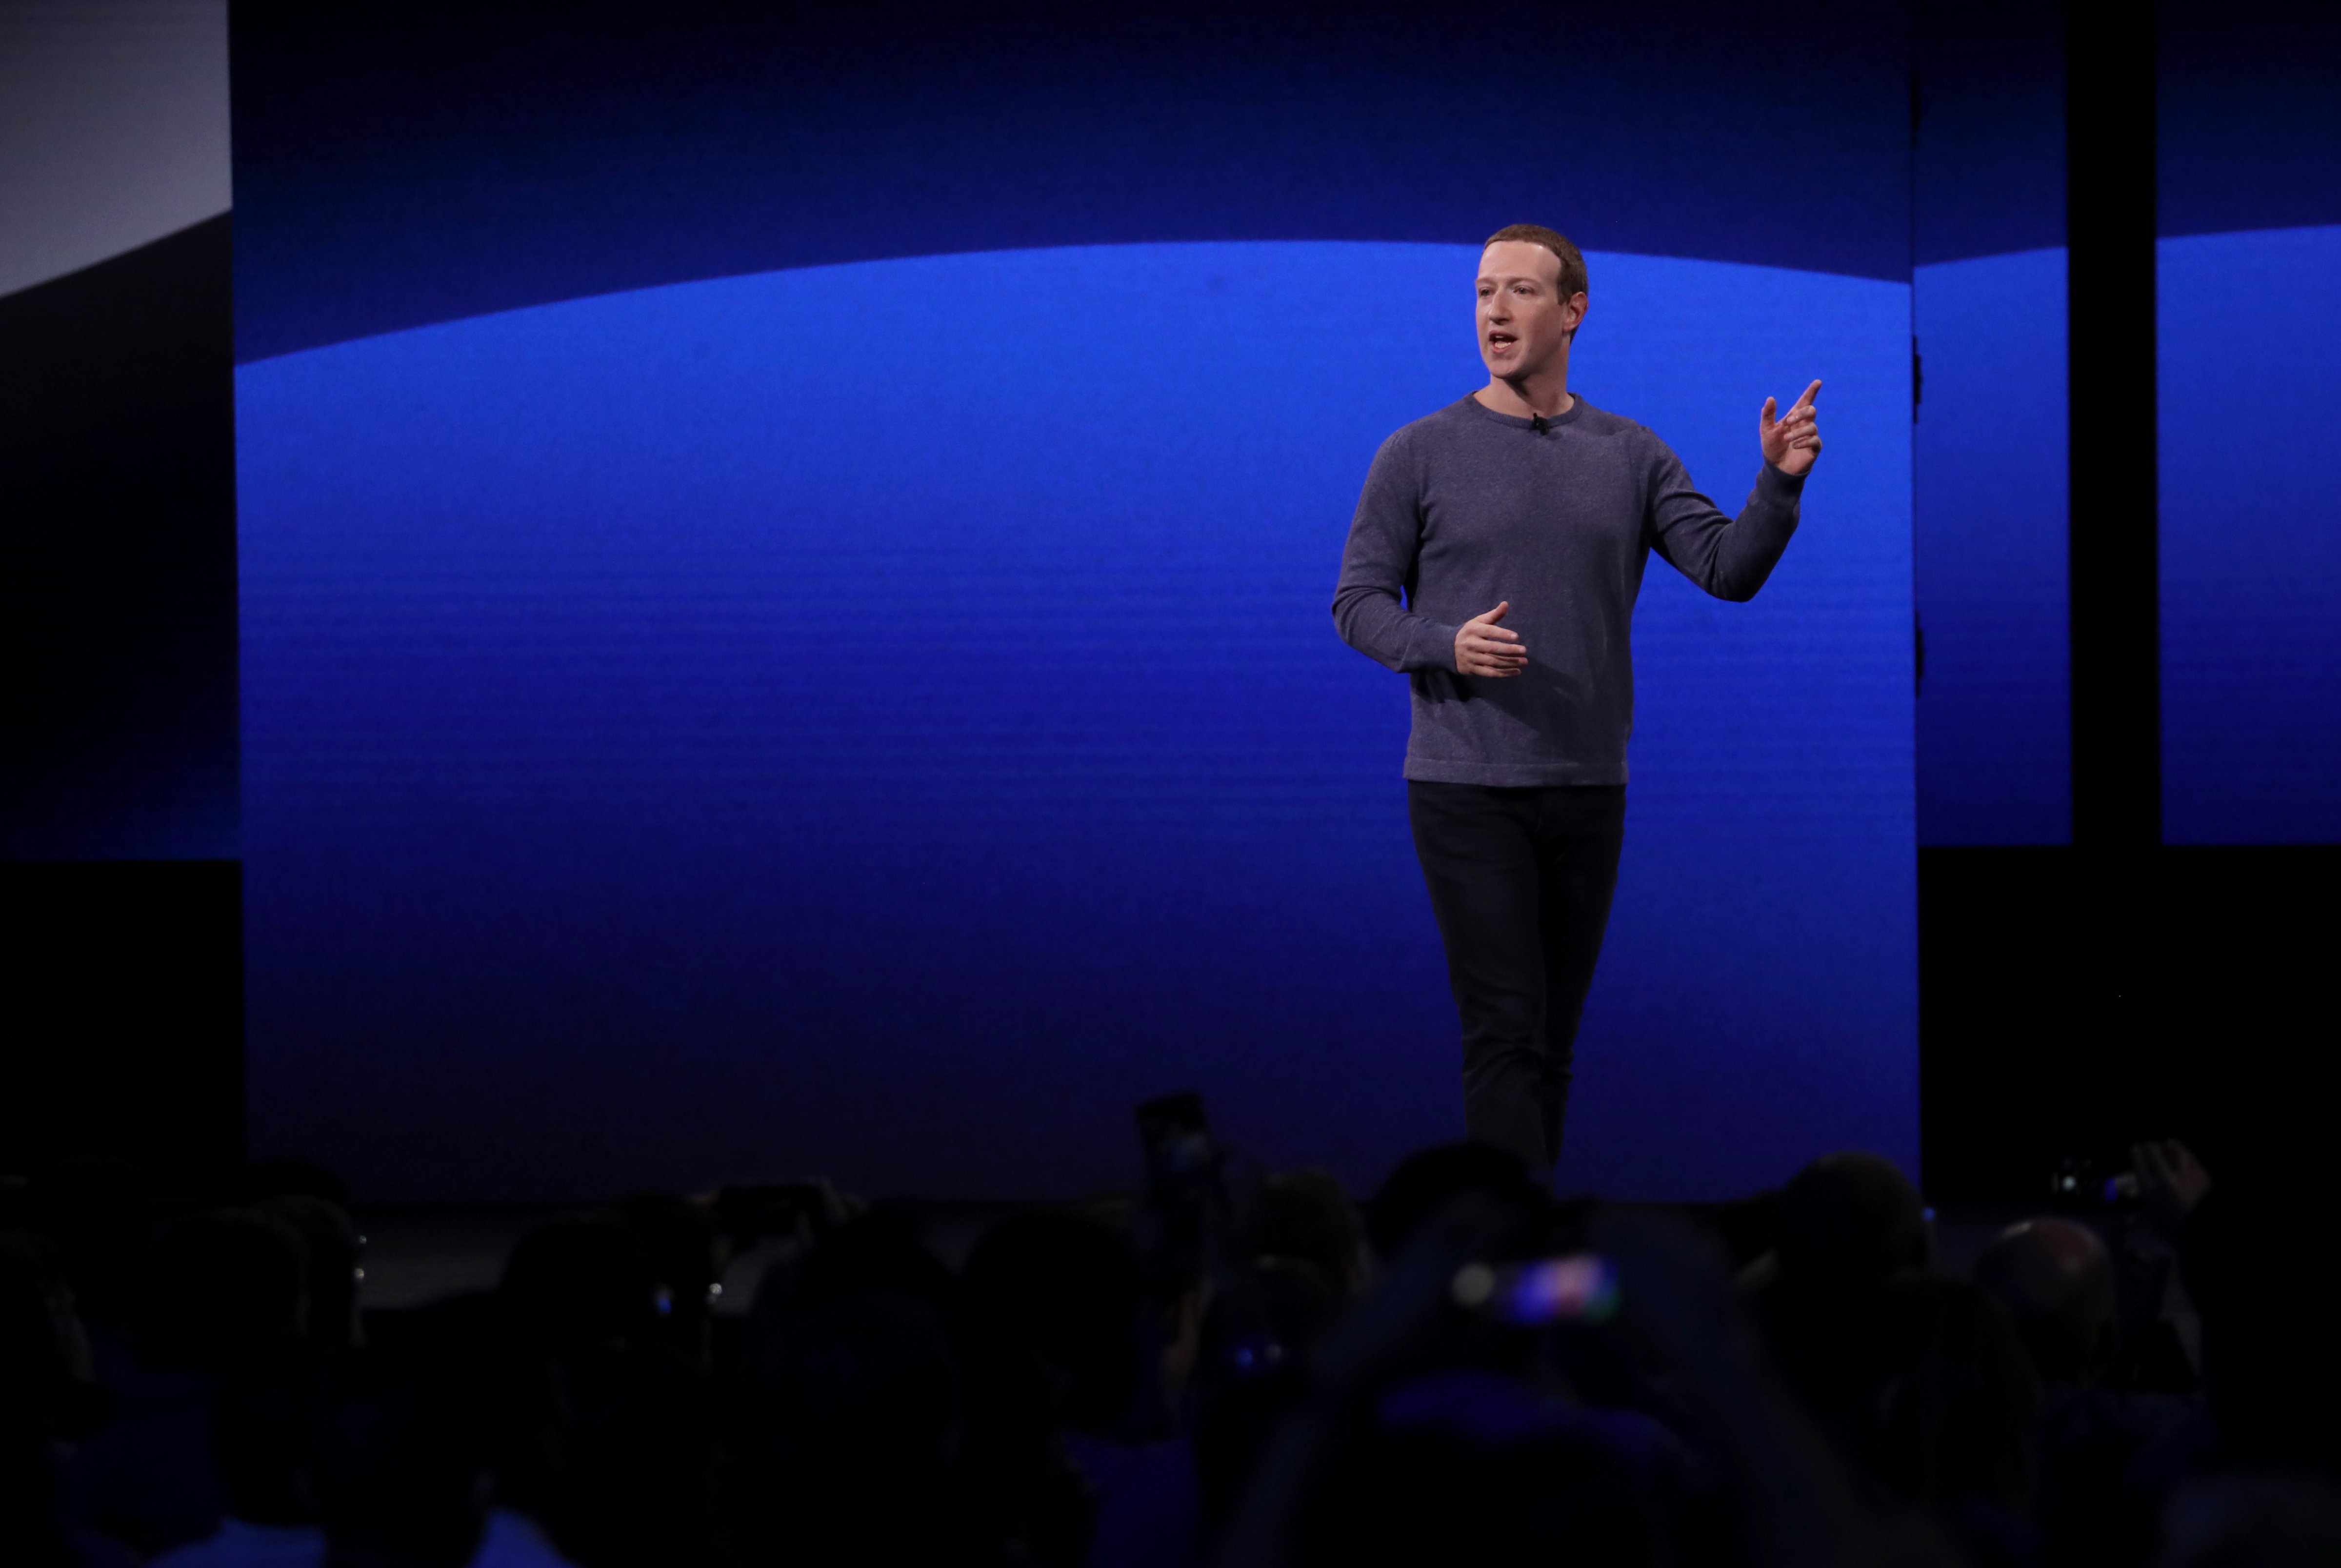 Facebook CEO Mark Zuckerberg speaks during the F8 Facebook Developers conference on April 30, 2019 in San Jose, California. (Justin Sullivan&mdash;Getty Images)